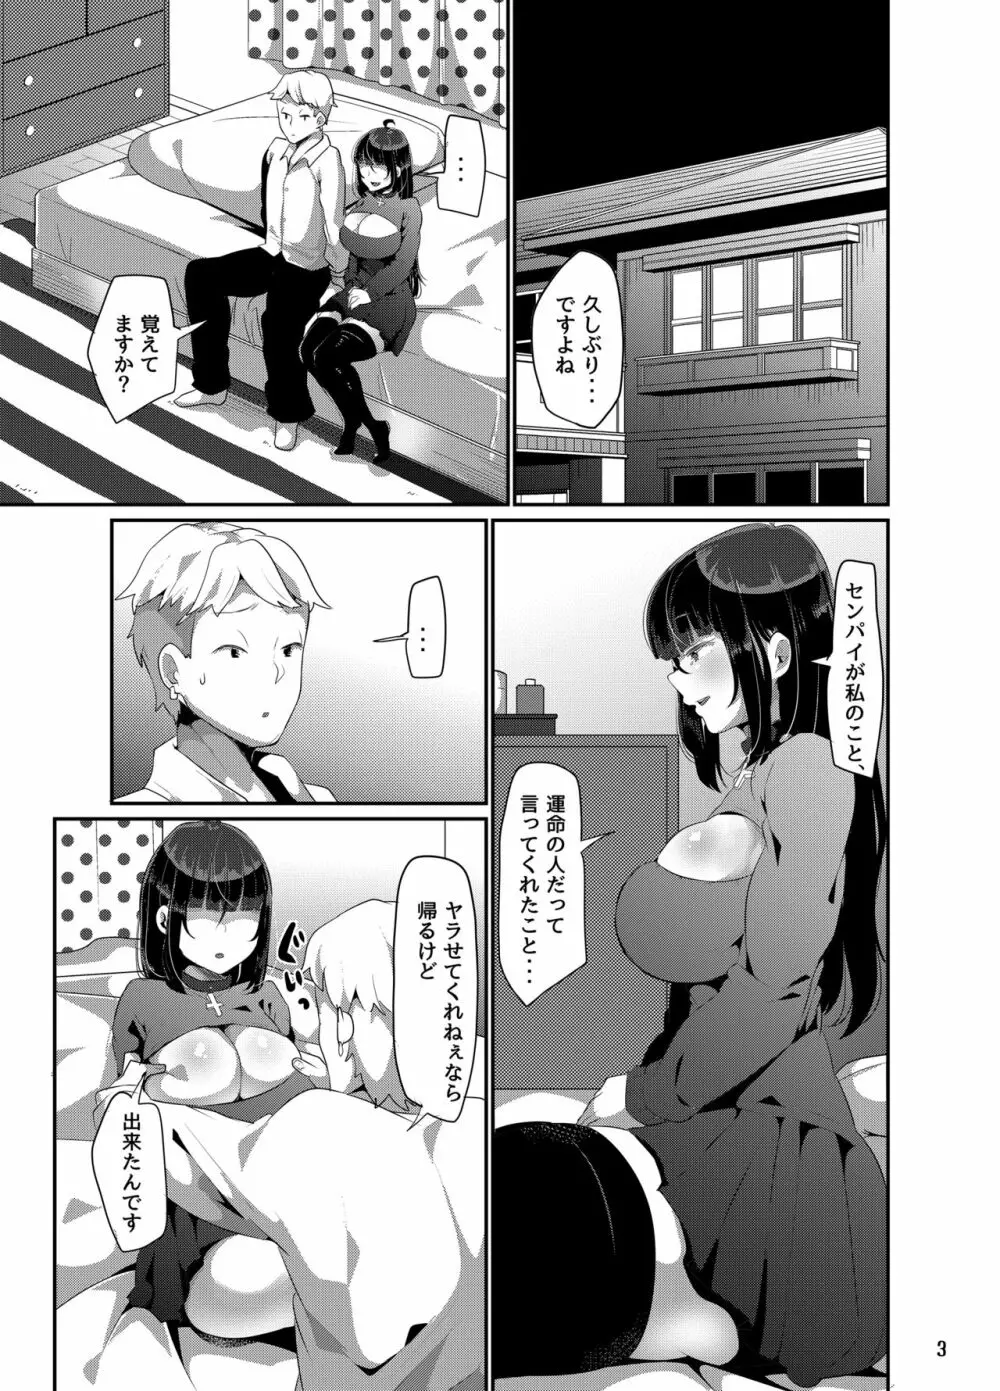 好き好き好き好き好き好き好き好き ver.5 - page4